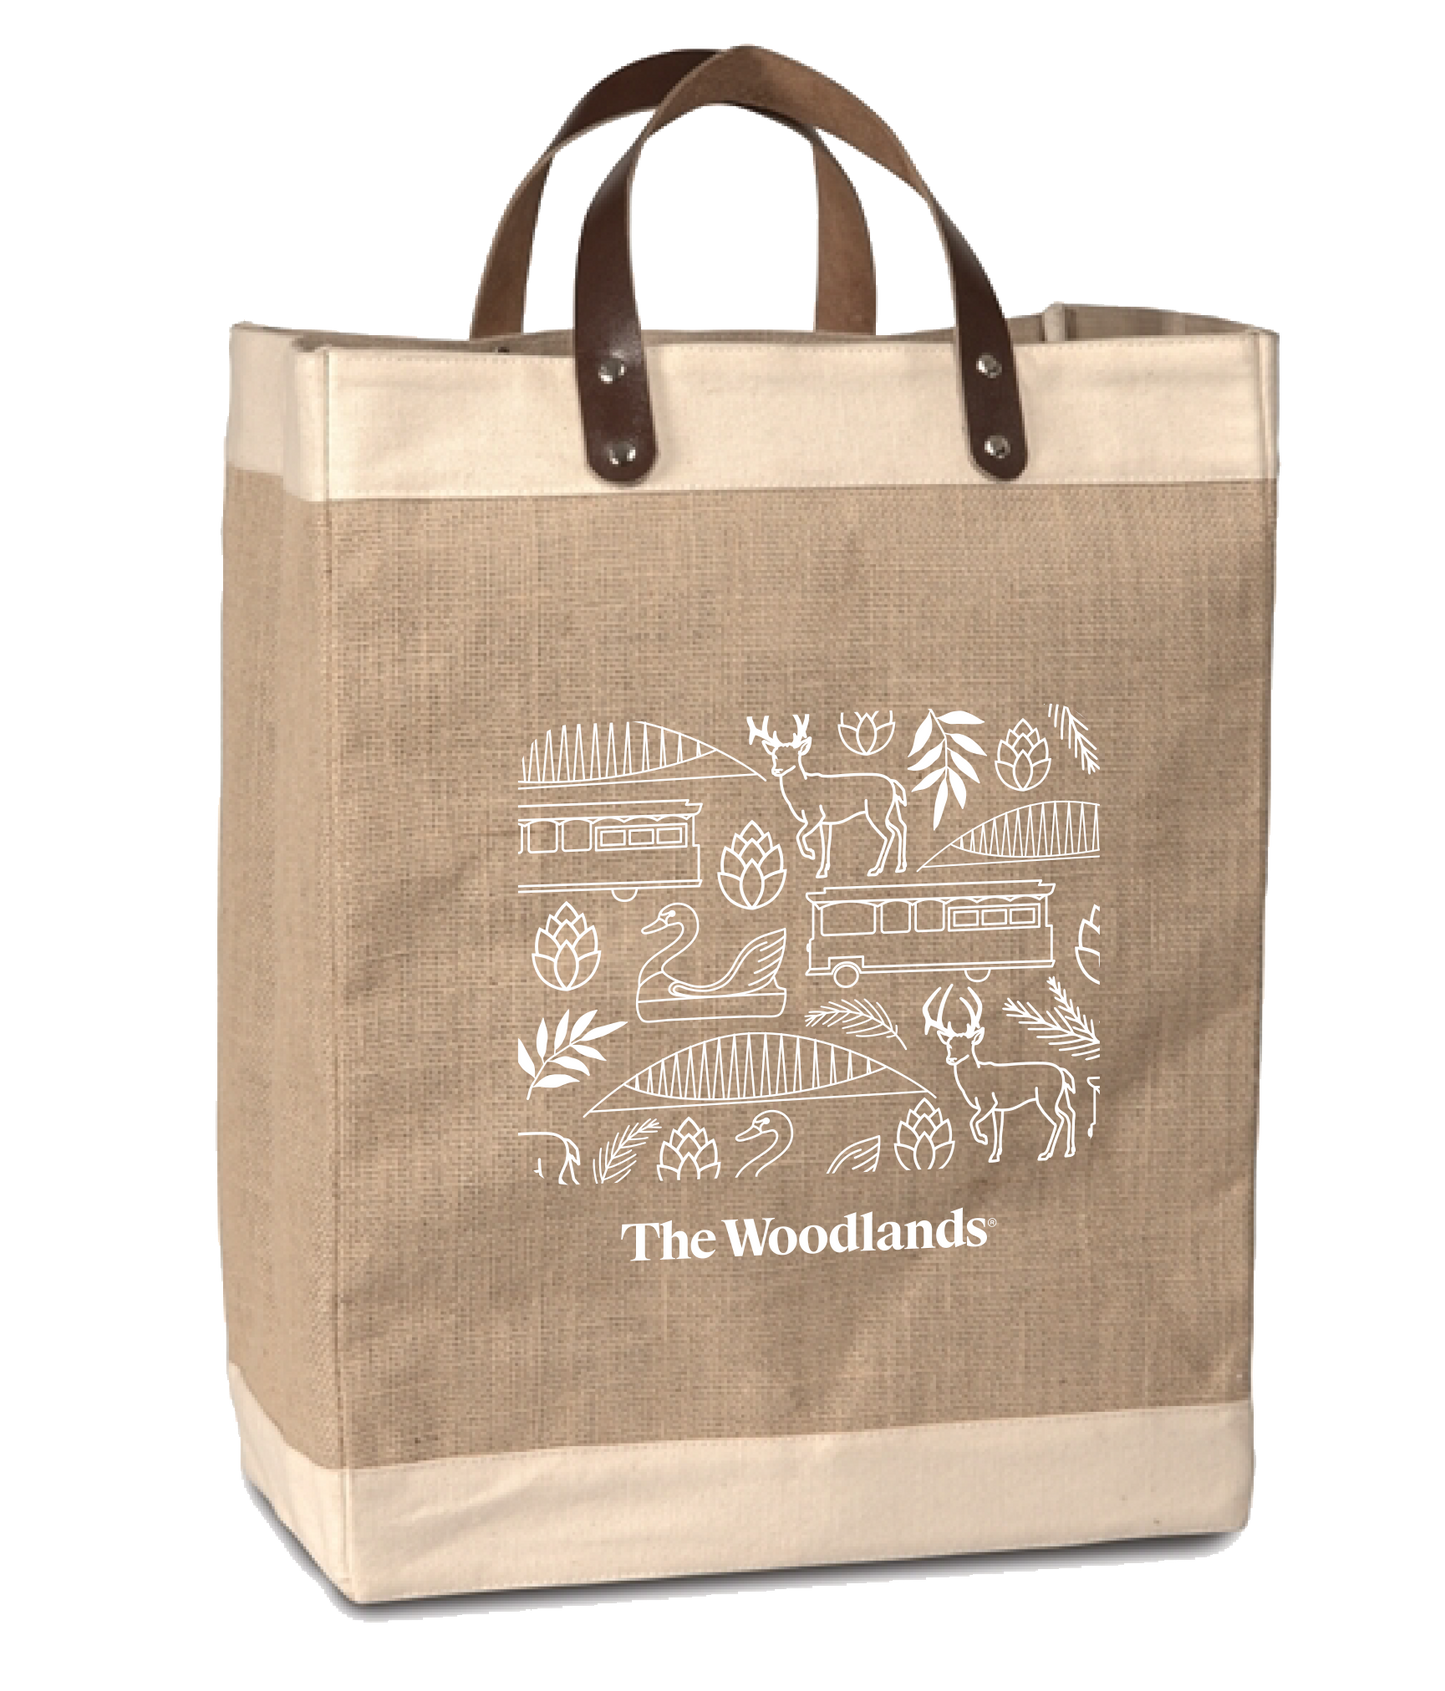 The Woodlands Tote Bag